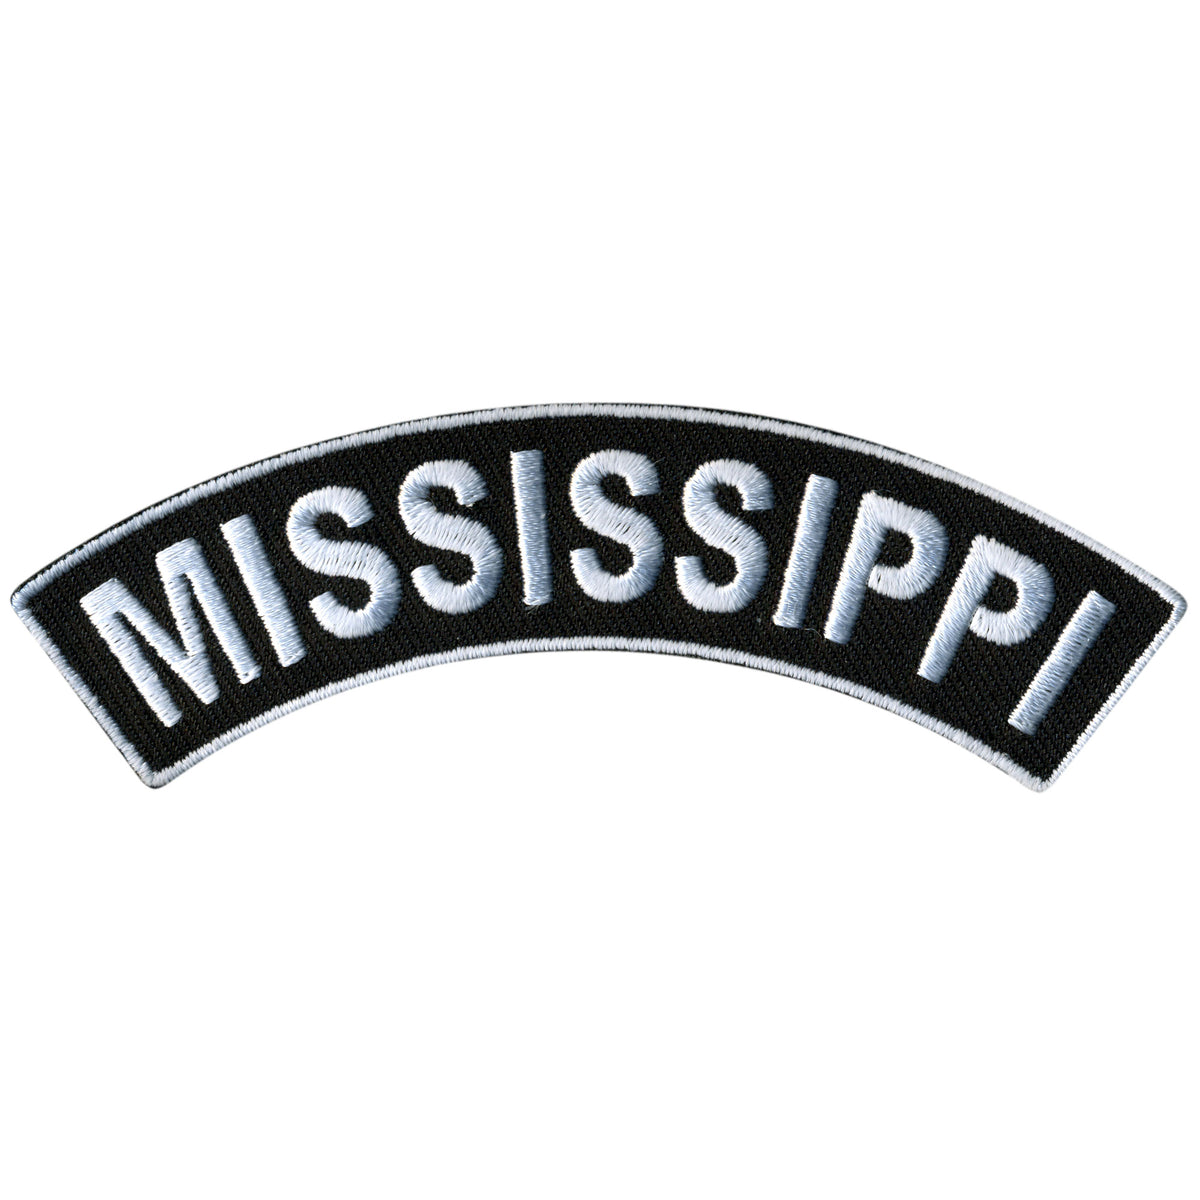 Hot Leathers Mississippi 4” X 1” Top Rocker Patch